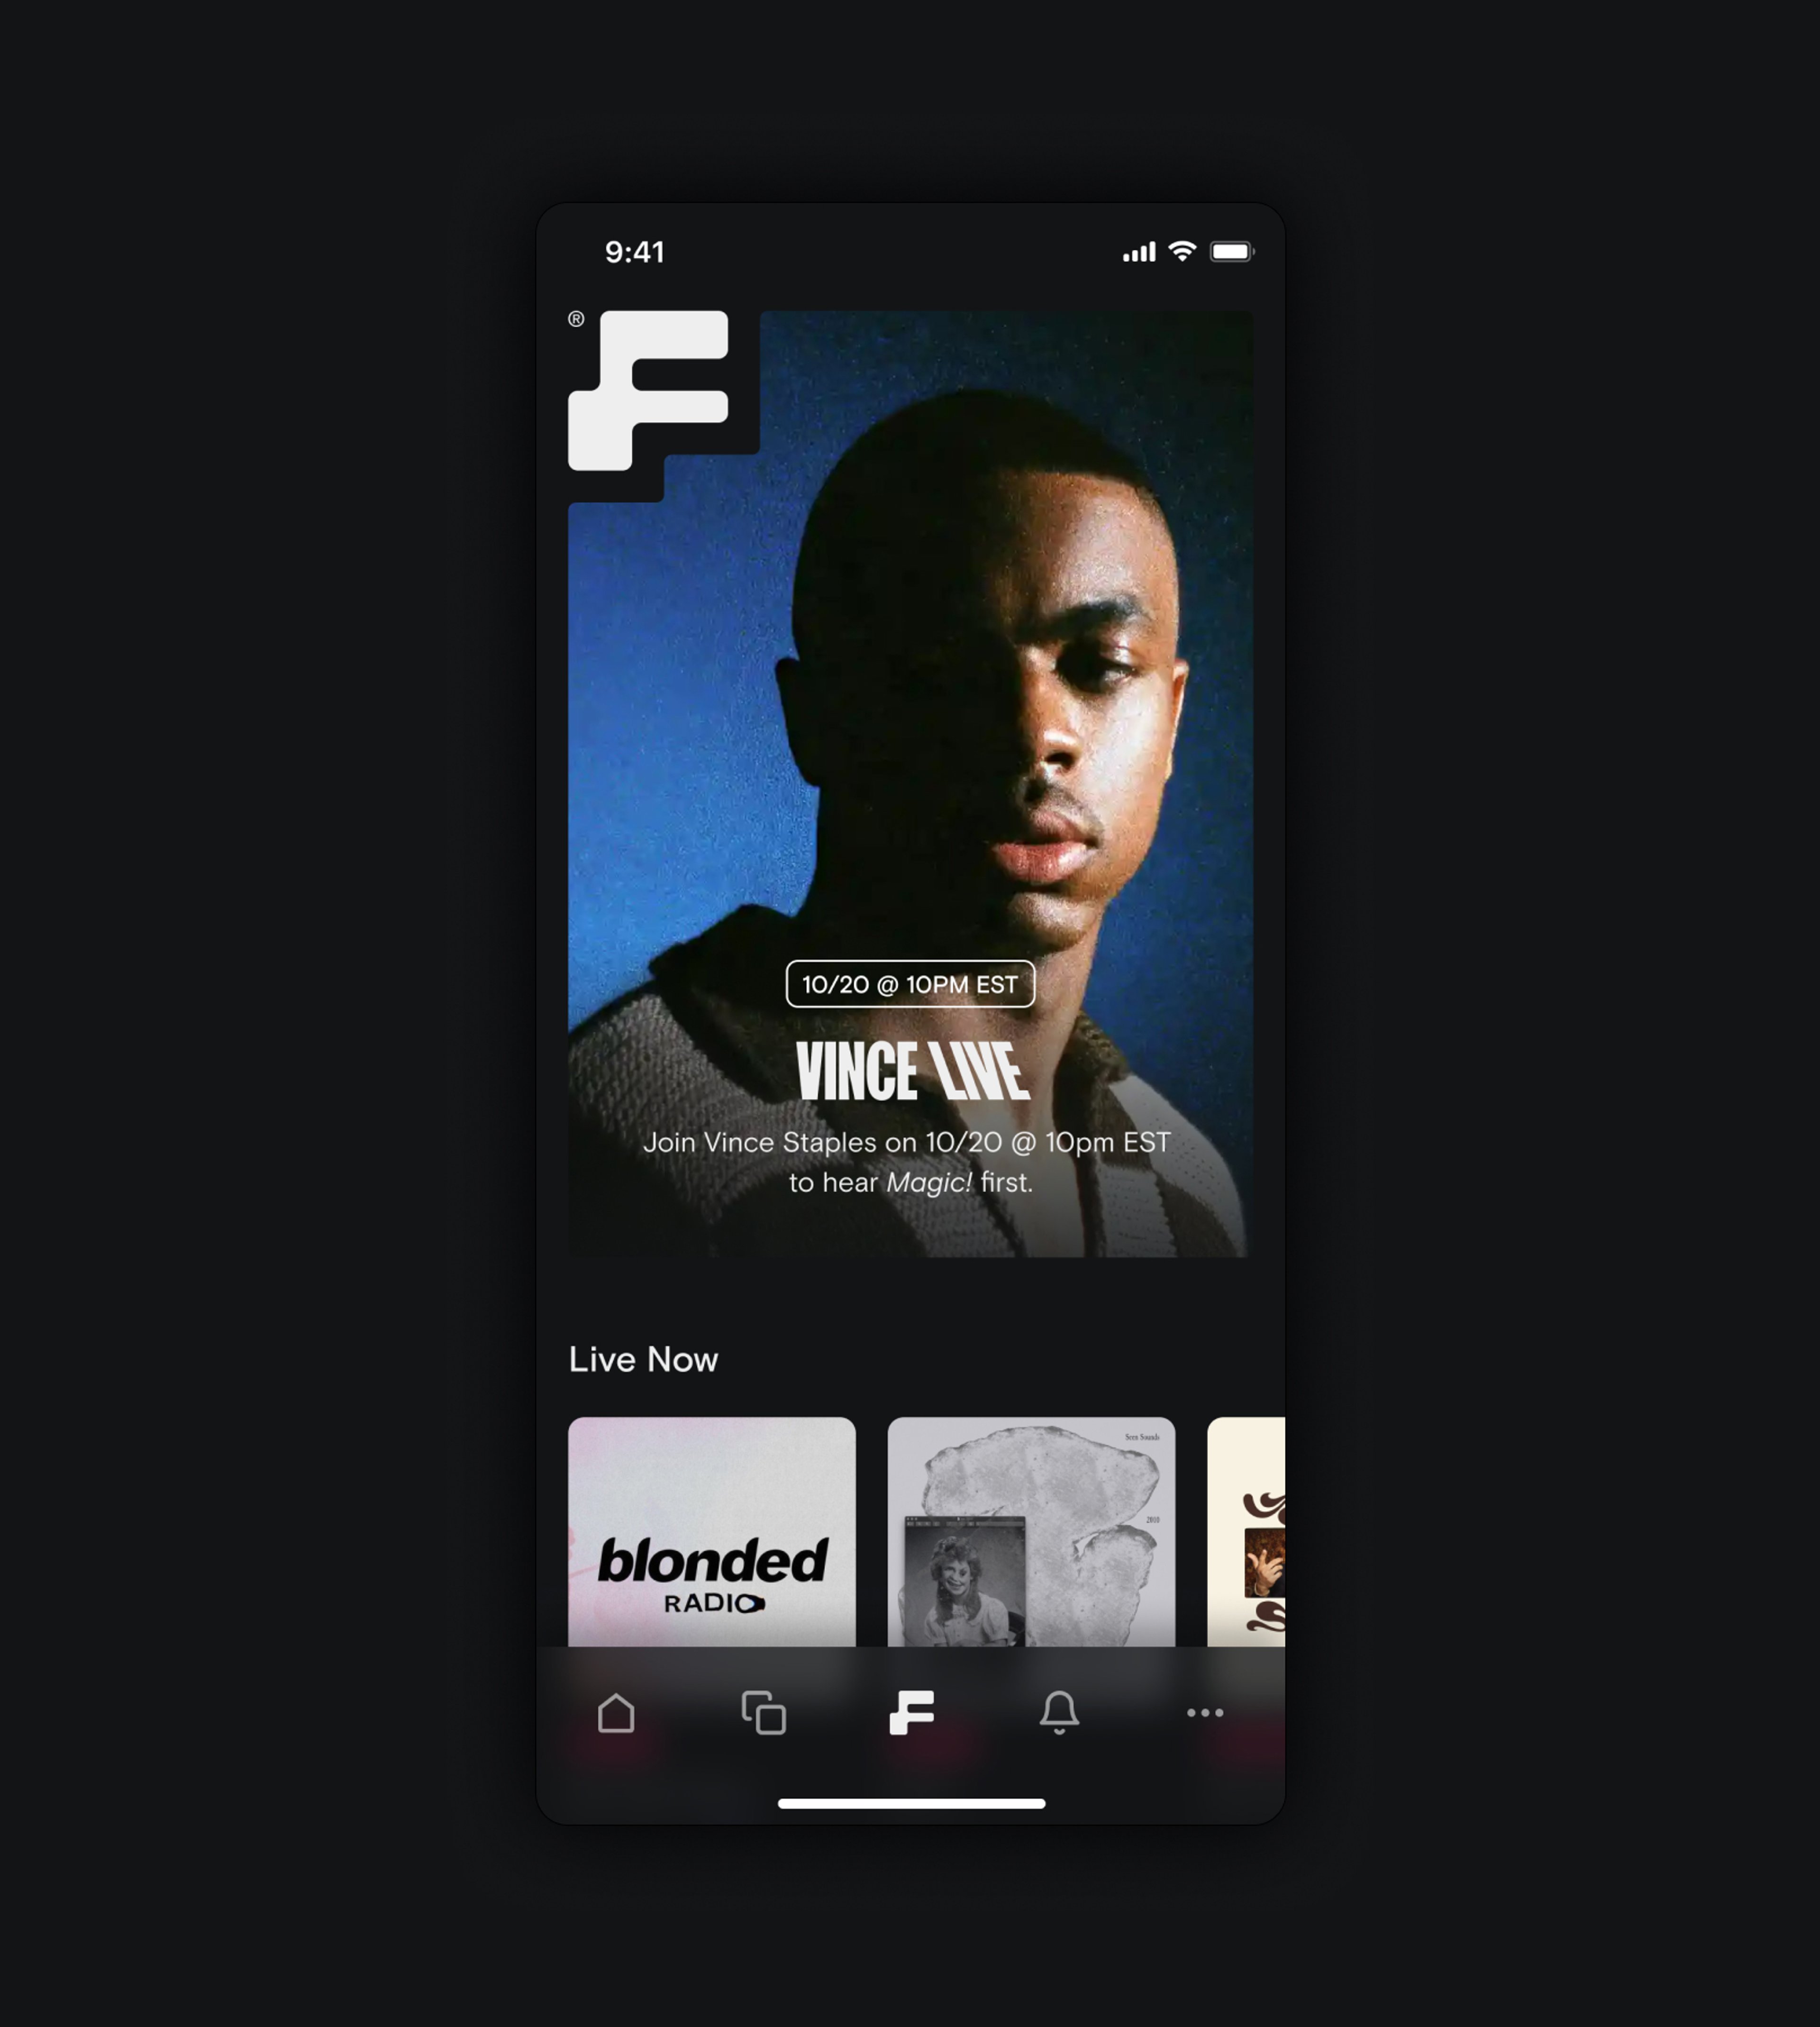 Screenshot of the homescreen of the iOS app showing the featured upcoming event of Vince Staples live stream